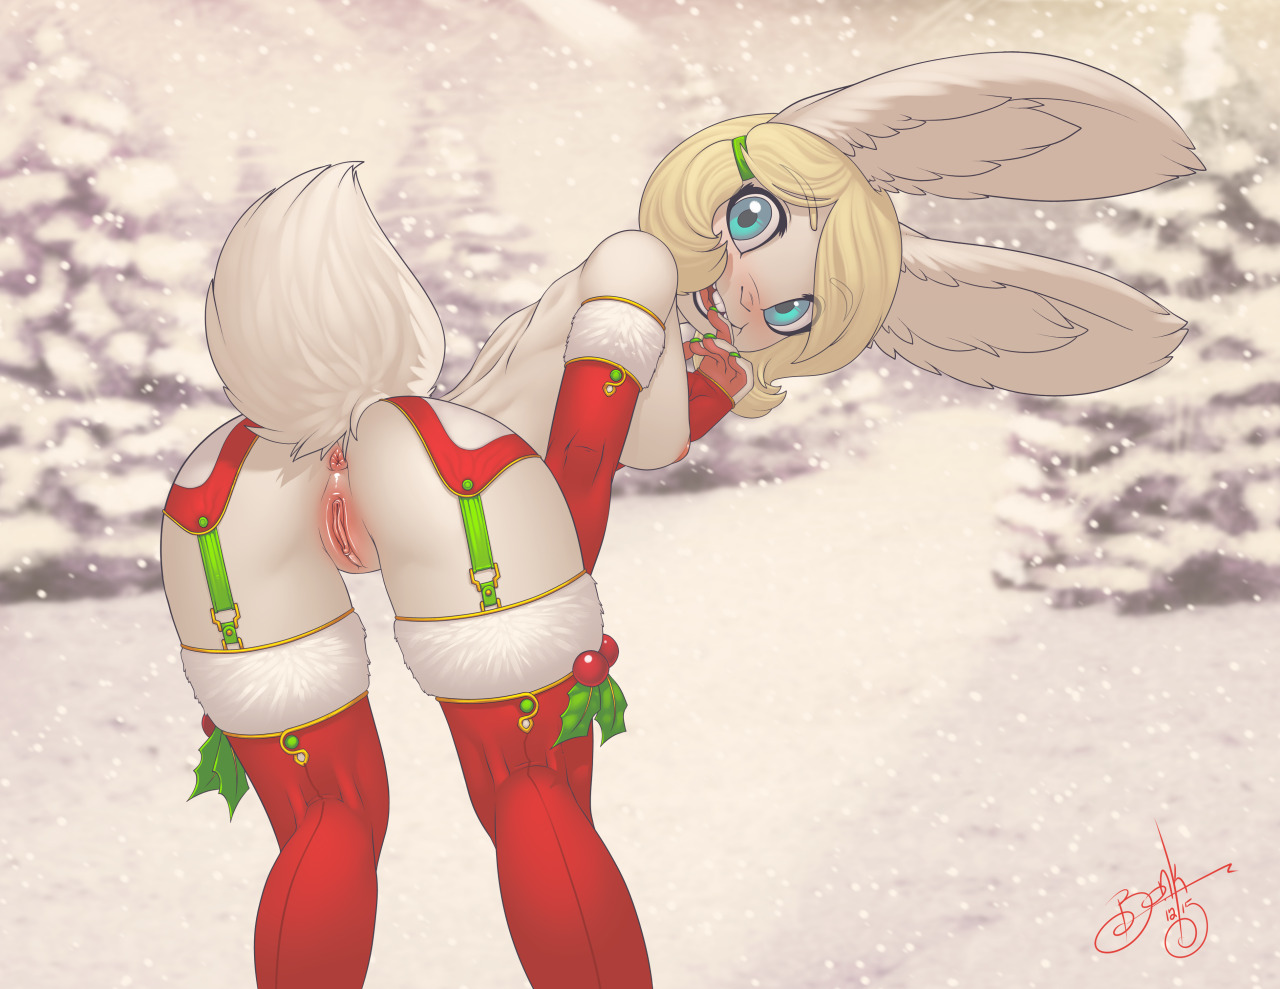 bonksart:  Happy holidays everyone!  This is Phixyl and she got all dolled up for